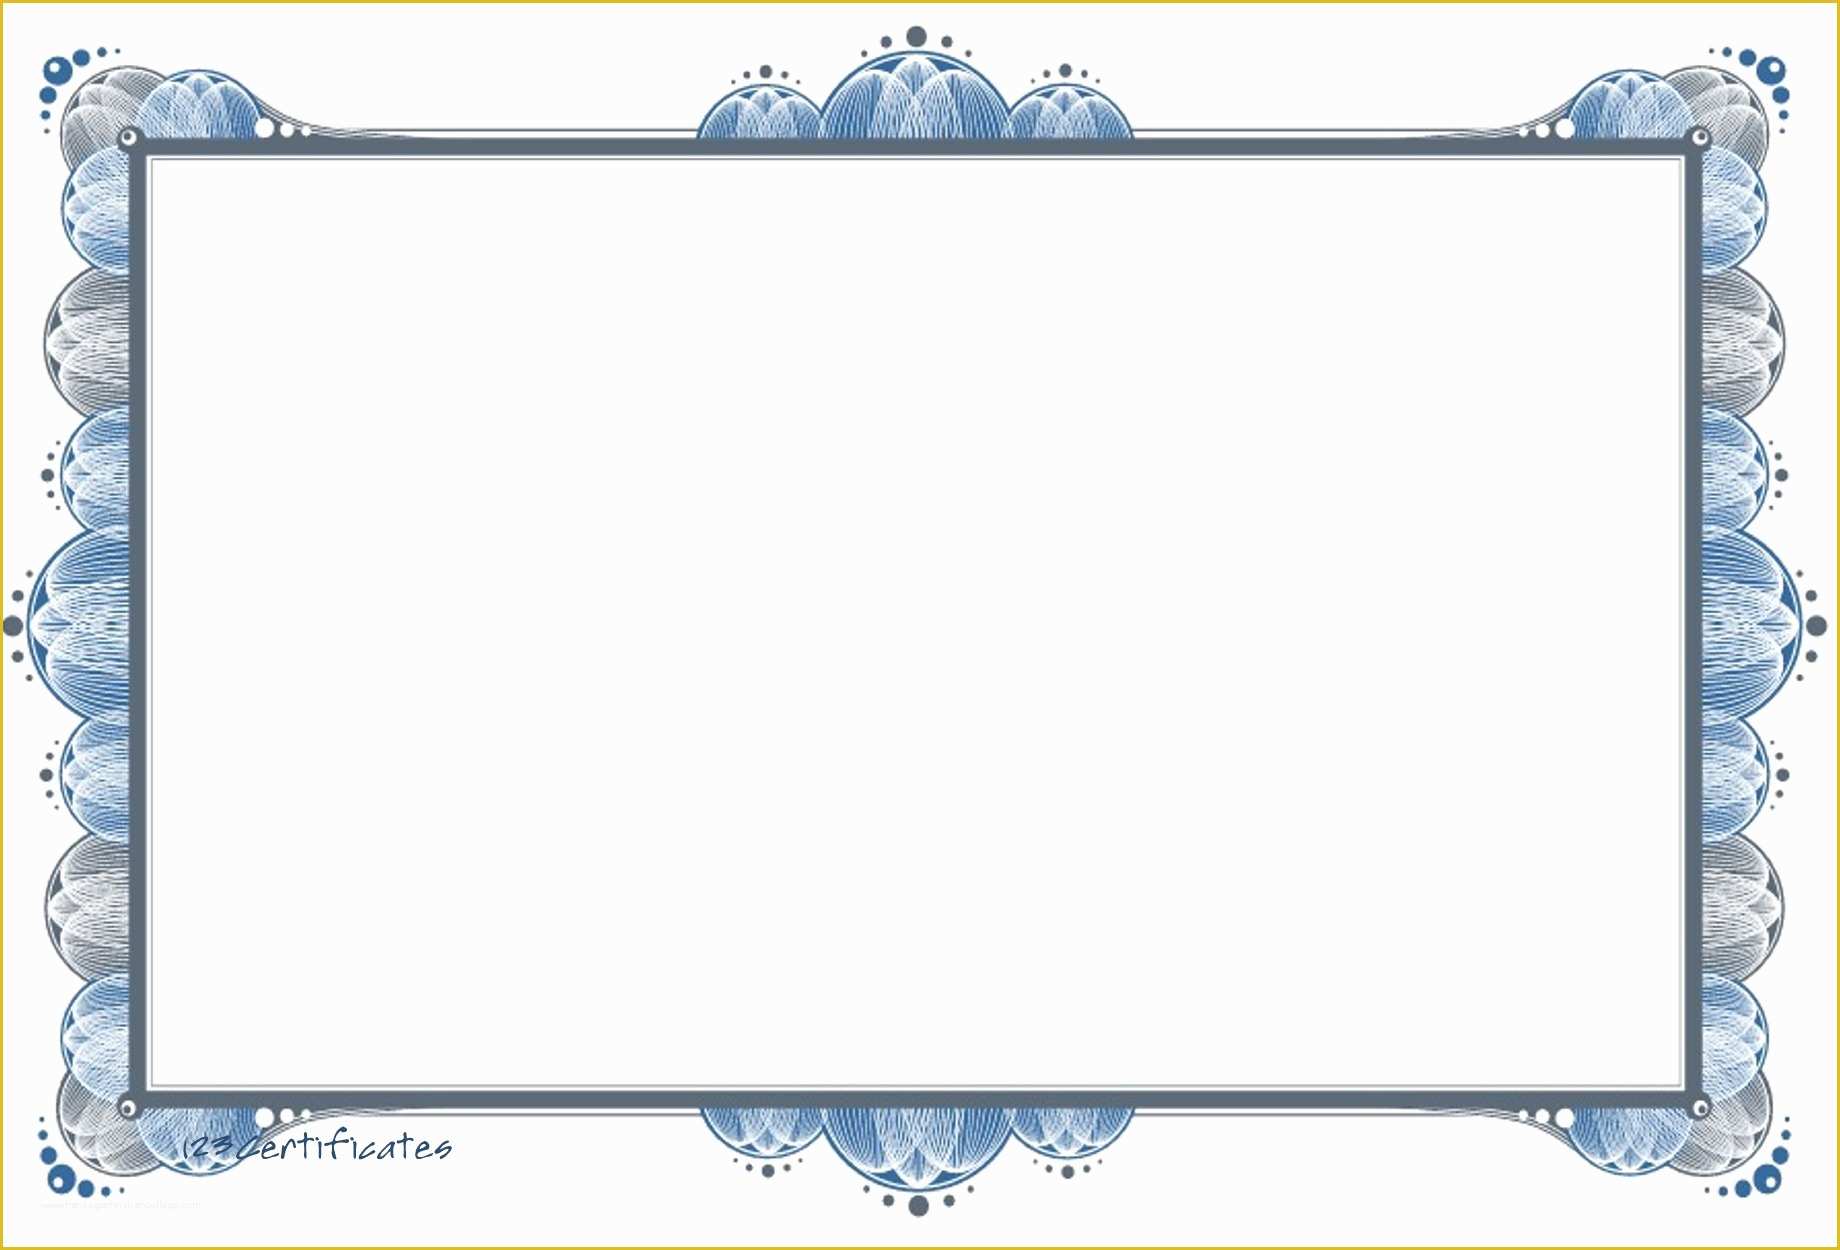 Certificate Templates Free Download Of Free Certificate Borders to